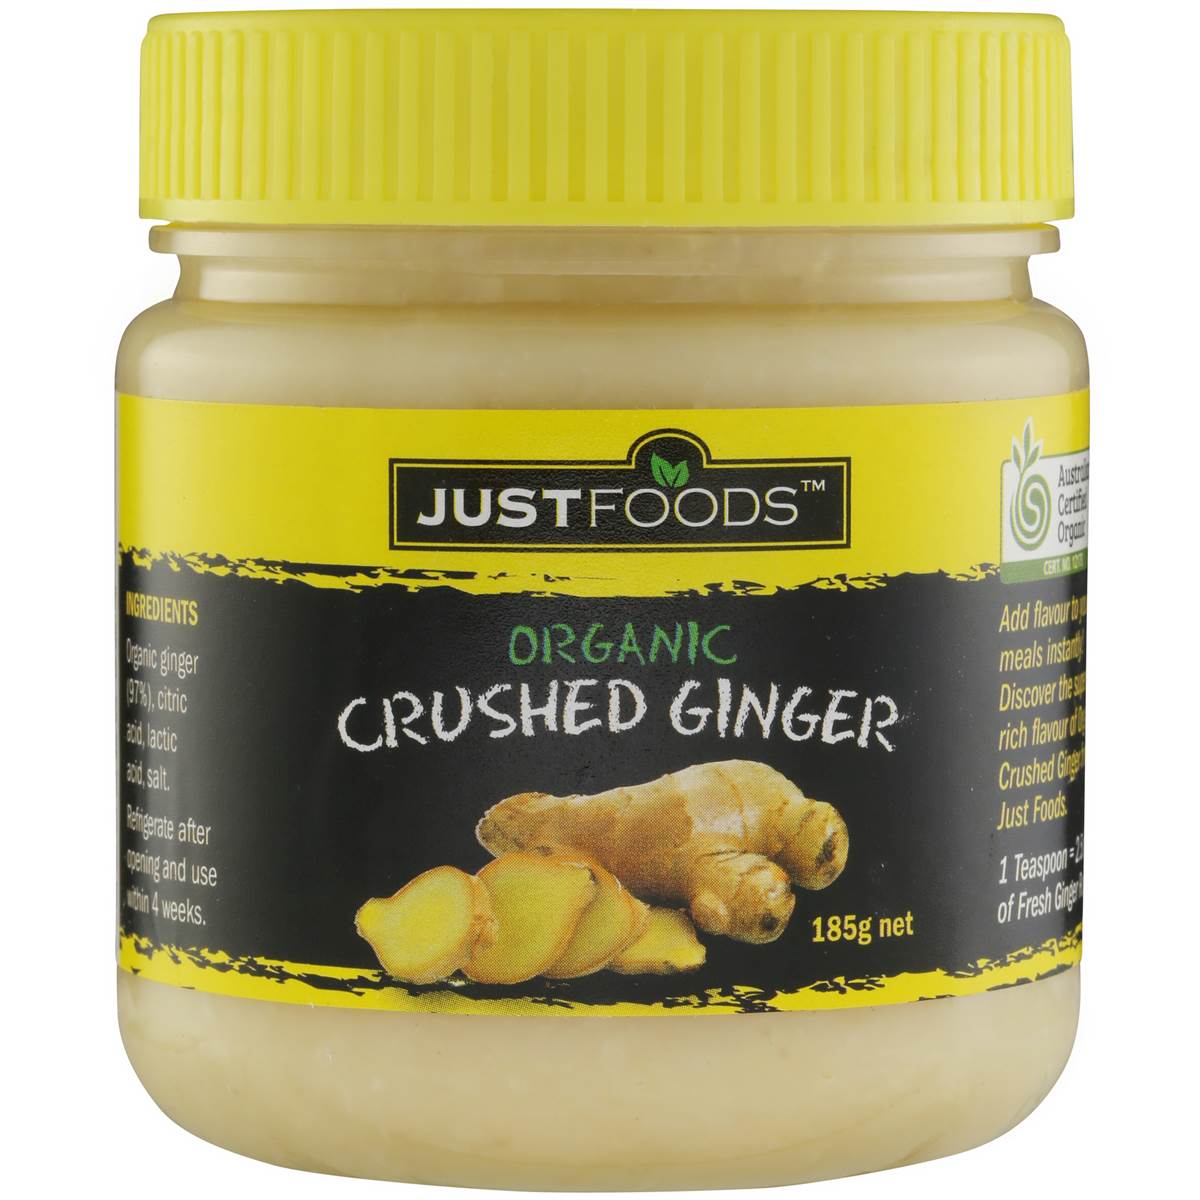 Calories in Just Foods Crushed Ginger Organic